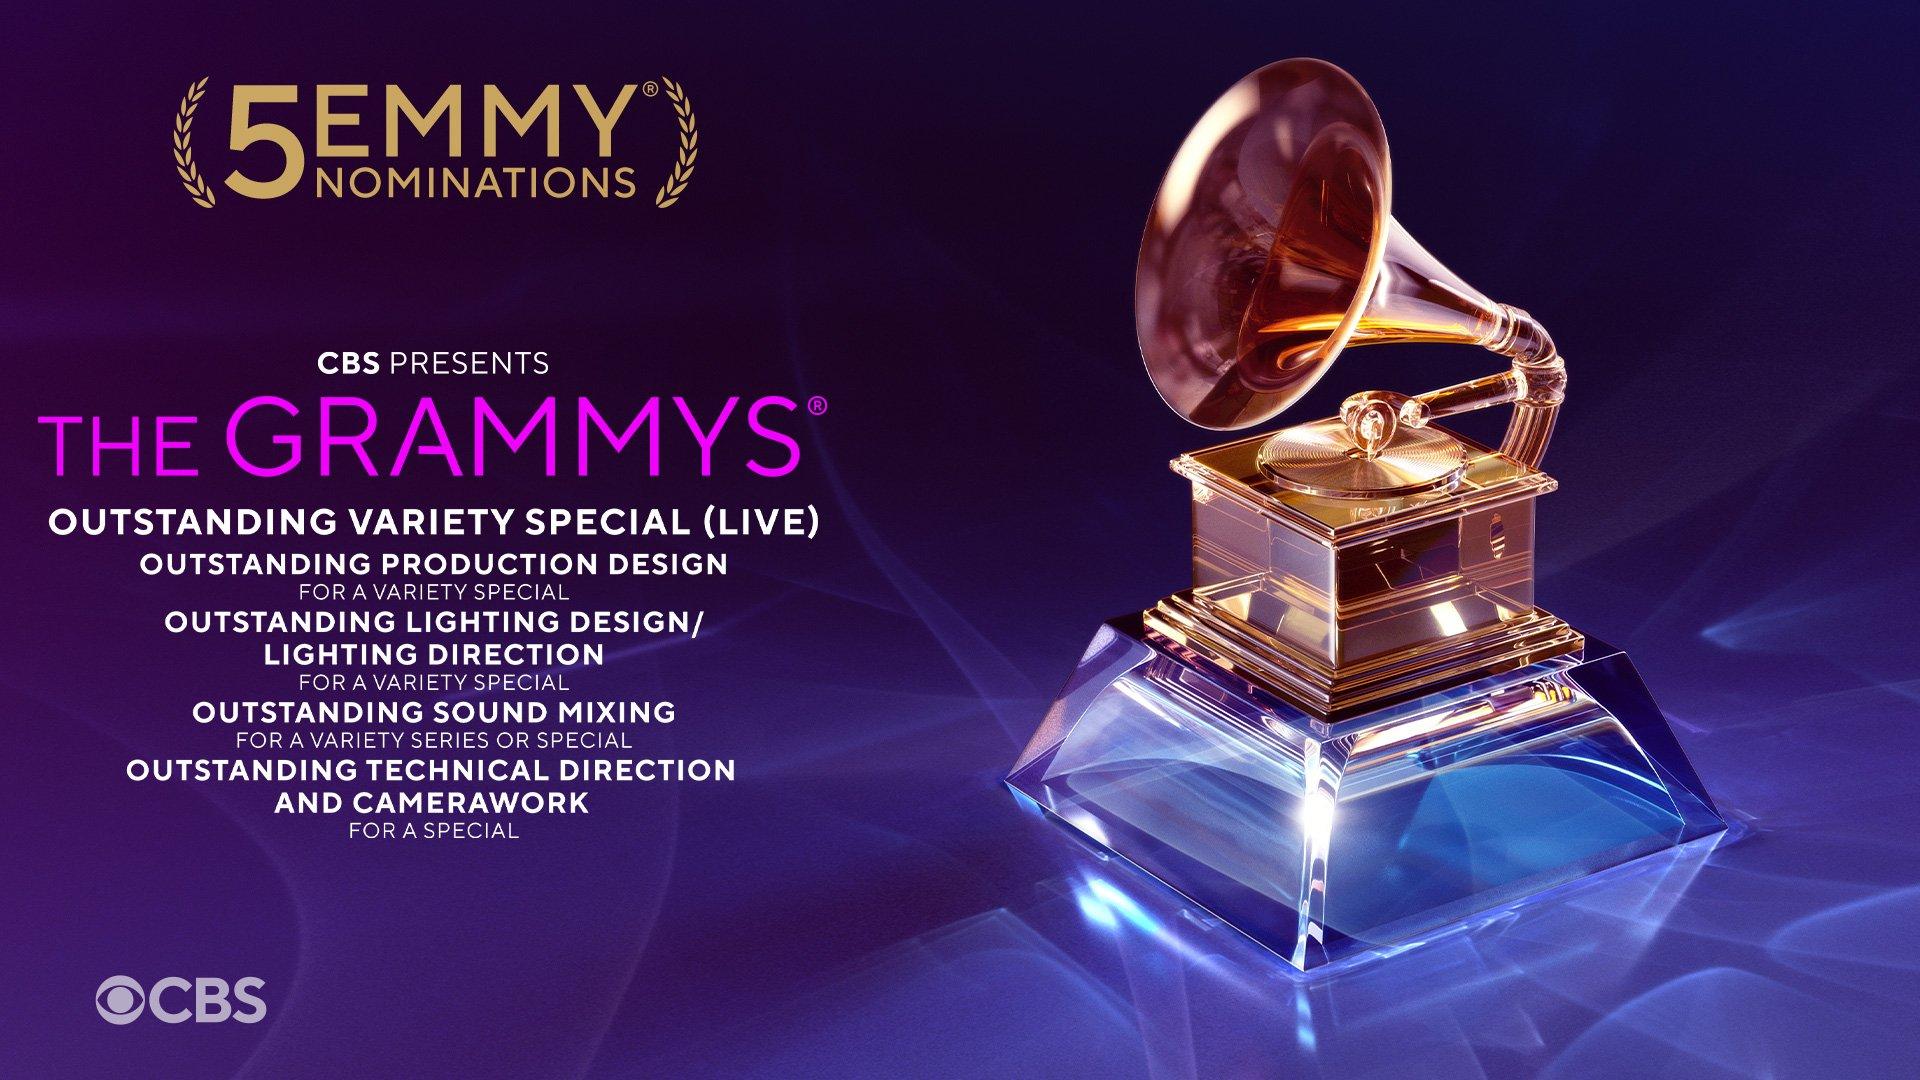 A photo of a GRAMMY Award featured listing the five nominations for the 2024 GRAMMYs at the 2024 Emmys, including Outstanding Variety Special (Live), Outstanding Production Design for a Variety Special, and more.